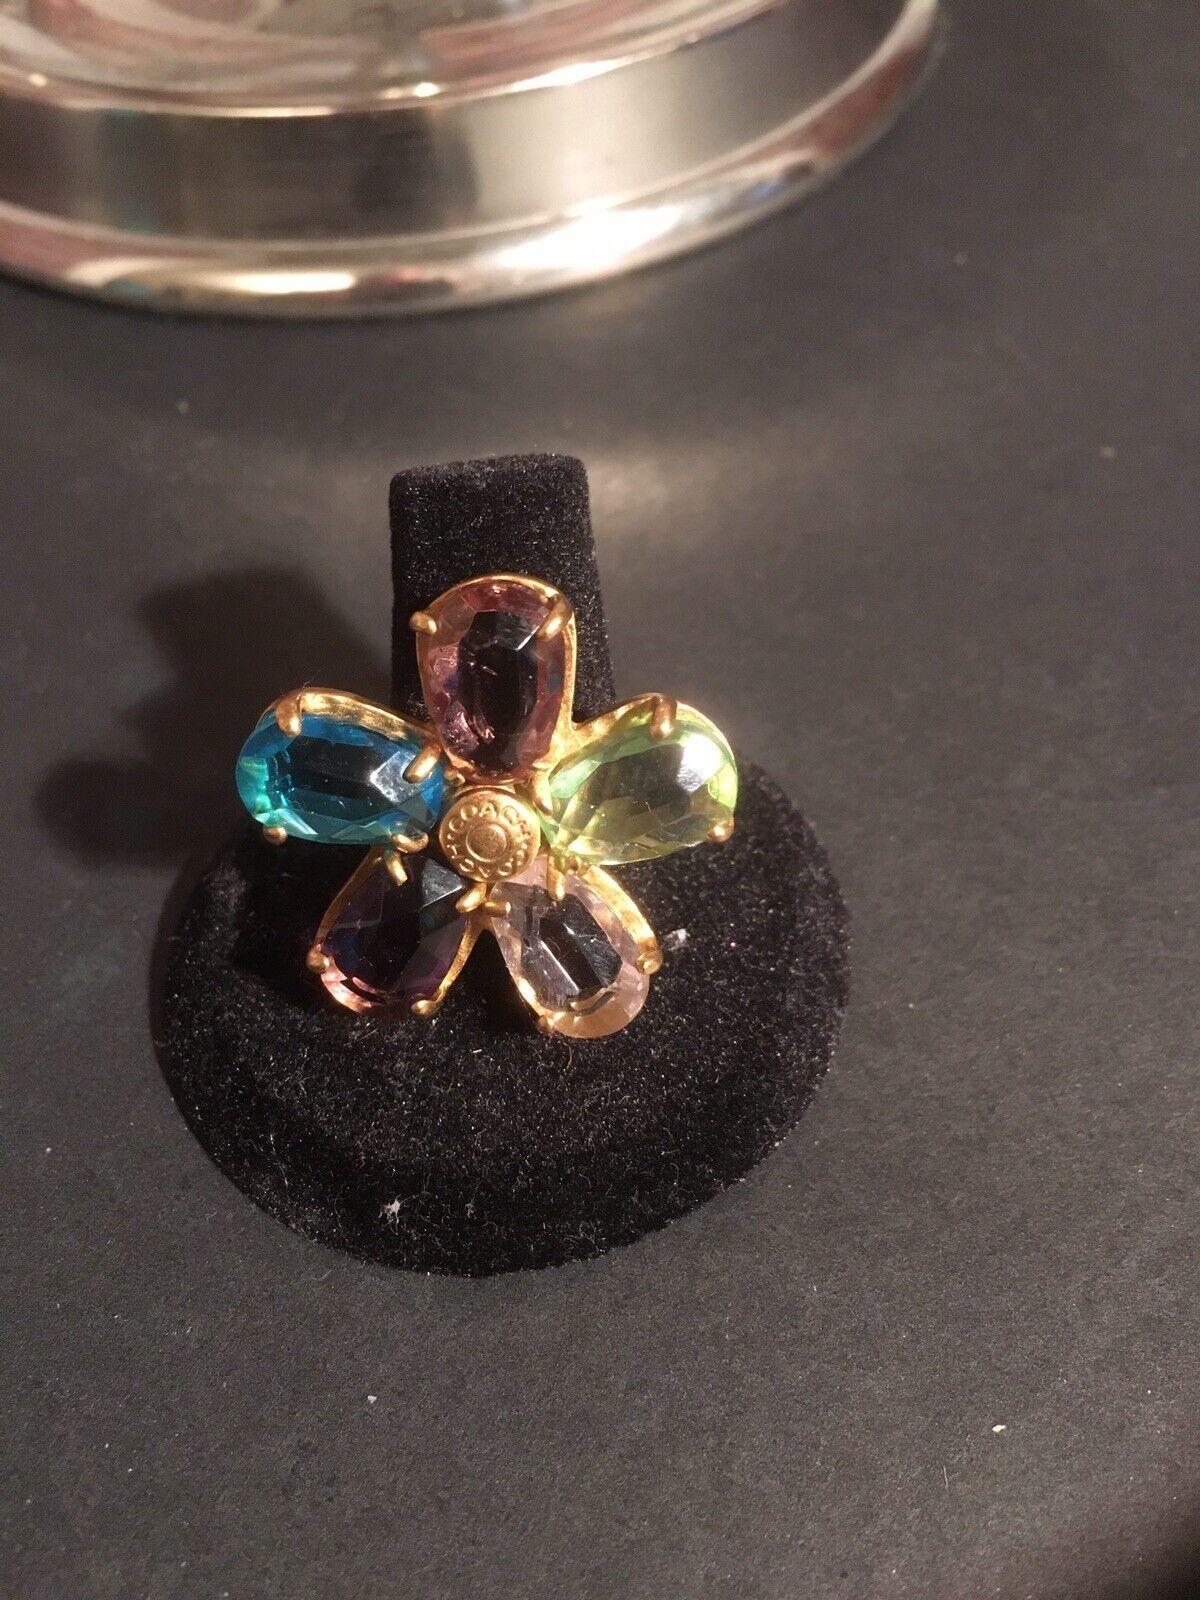 Vintage Coach Brand Pastels Flower Ring Gold Tone Size 7 - $59.00